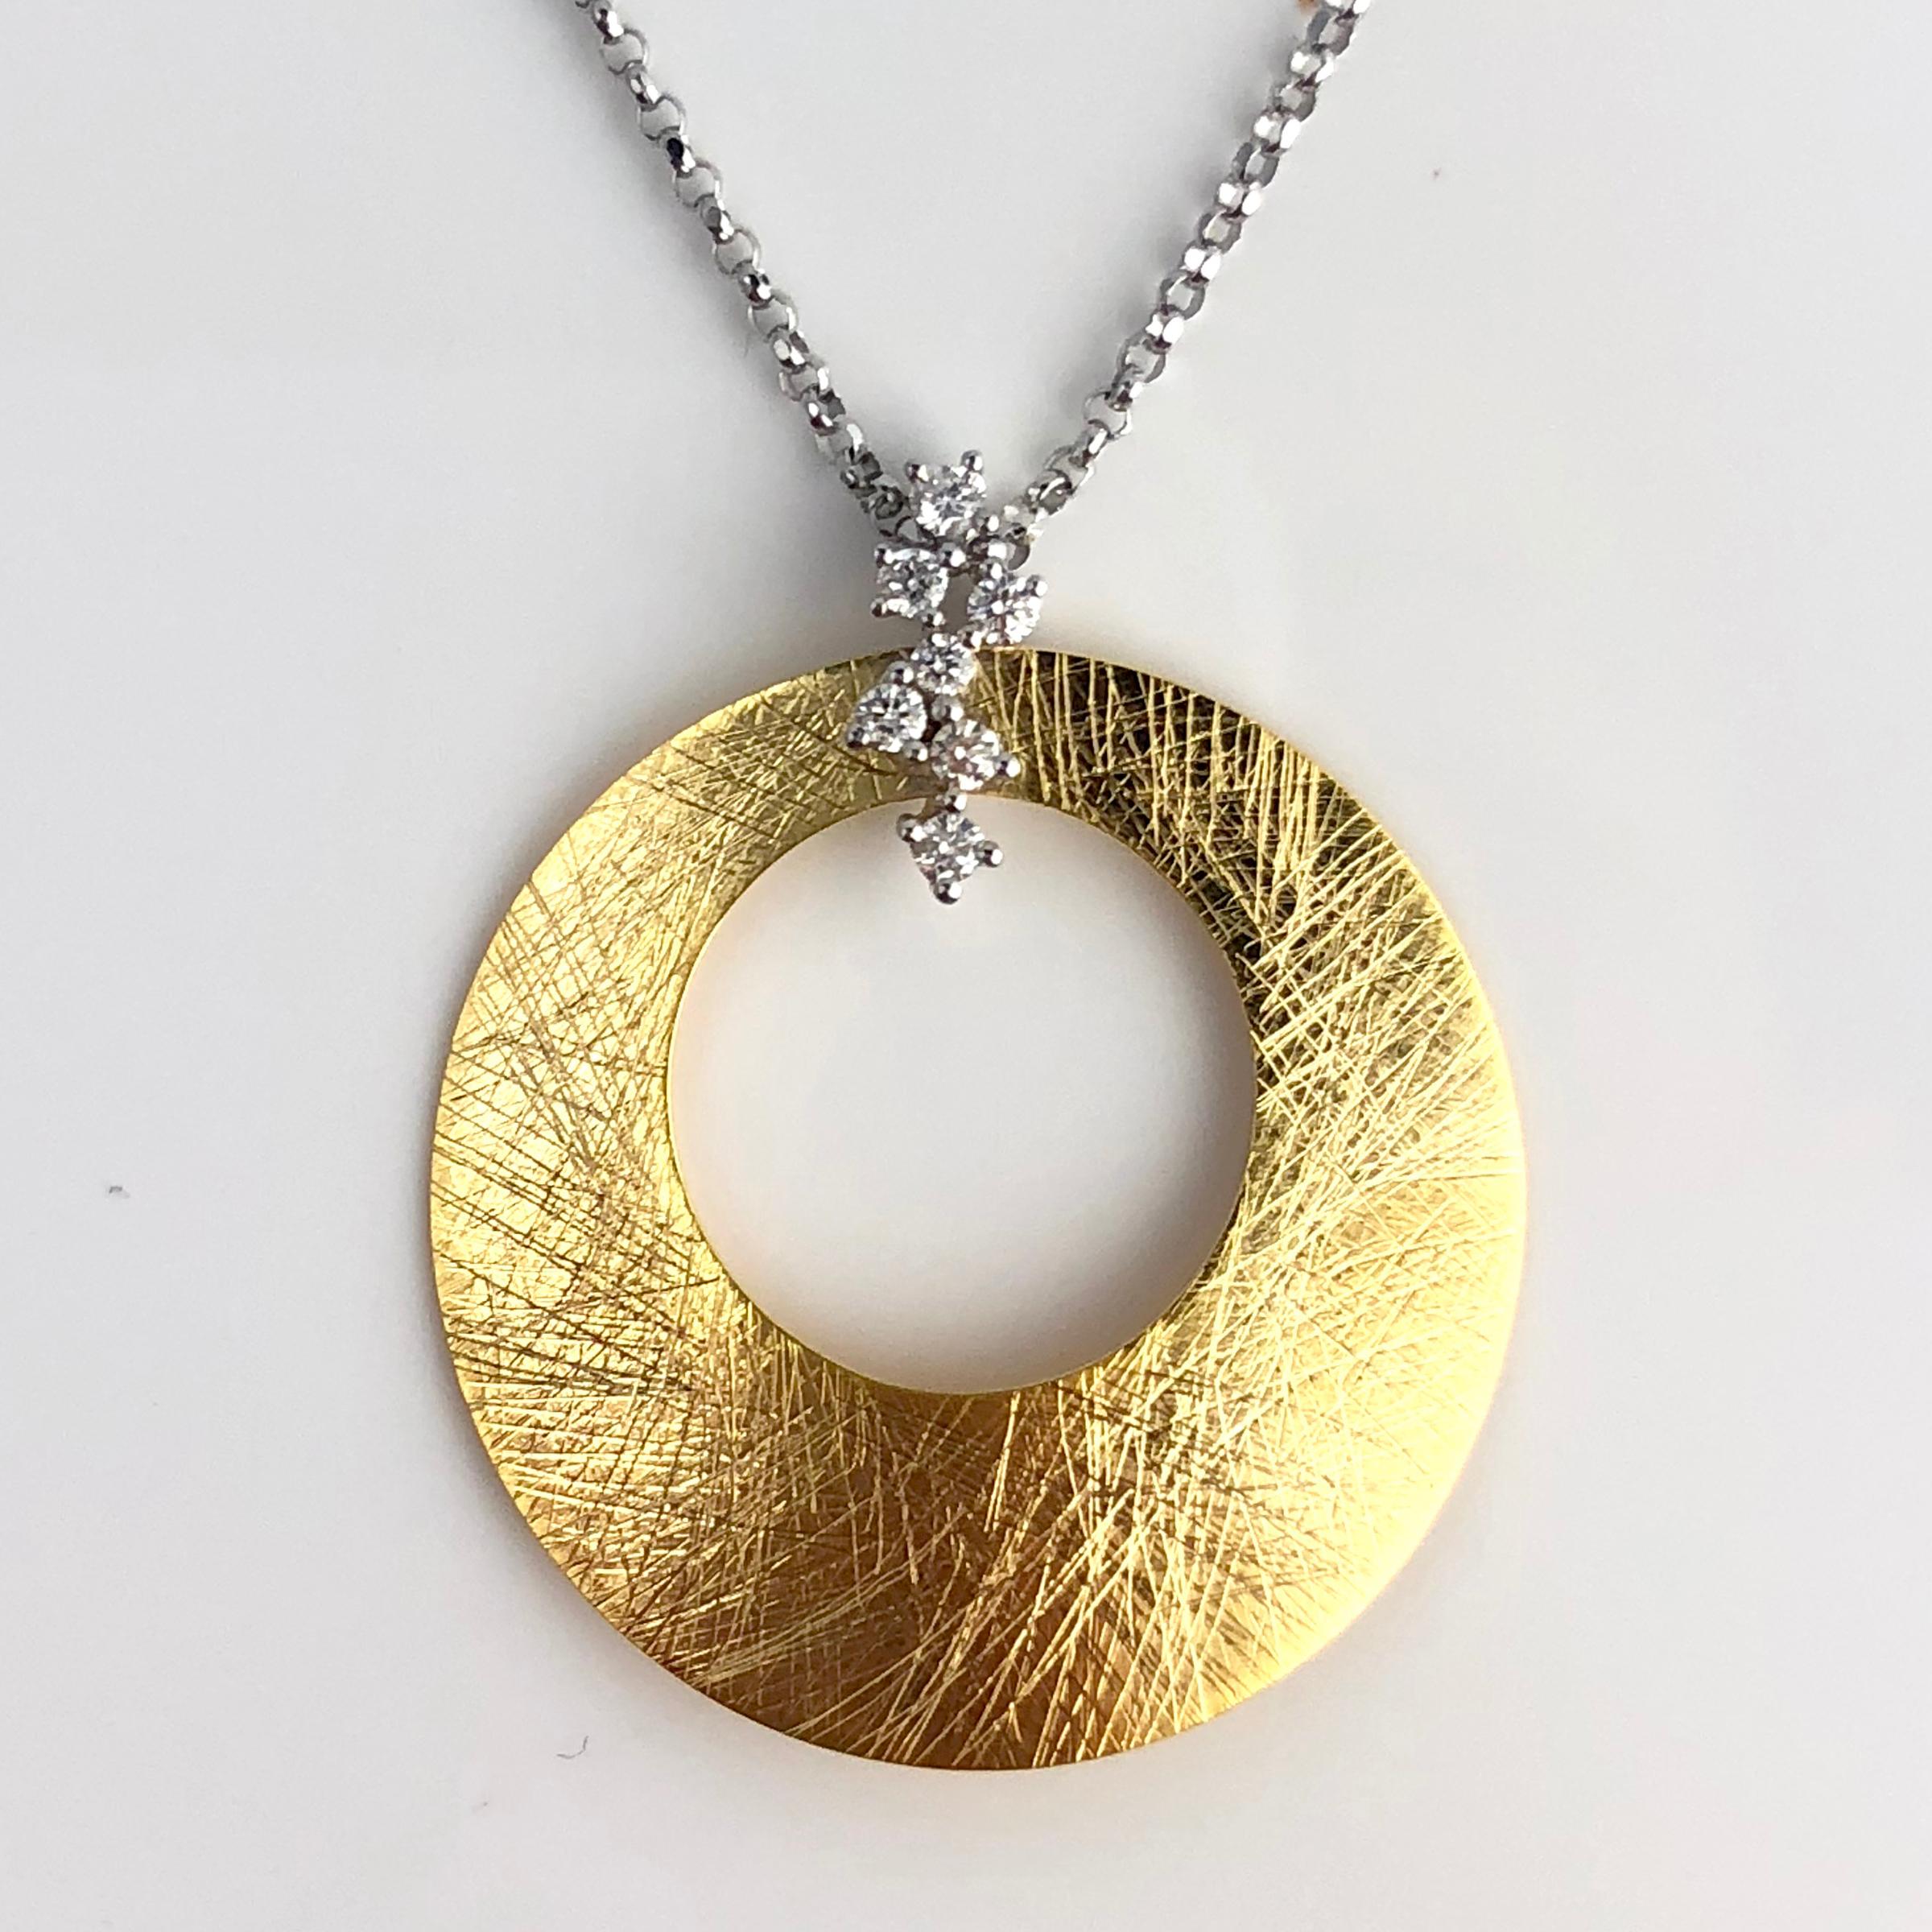 (DiamondTown) This pendant is a round disc with round cutout, accented by a 0.14 carat diamond branch design. A gorgeous accompaniment to any occasion.

Set in 14k Yellow and White Gold.

Many of our items have matching companion pieces. Please